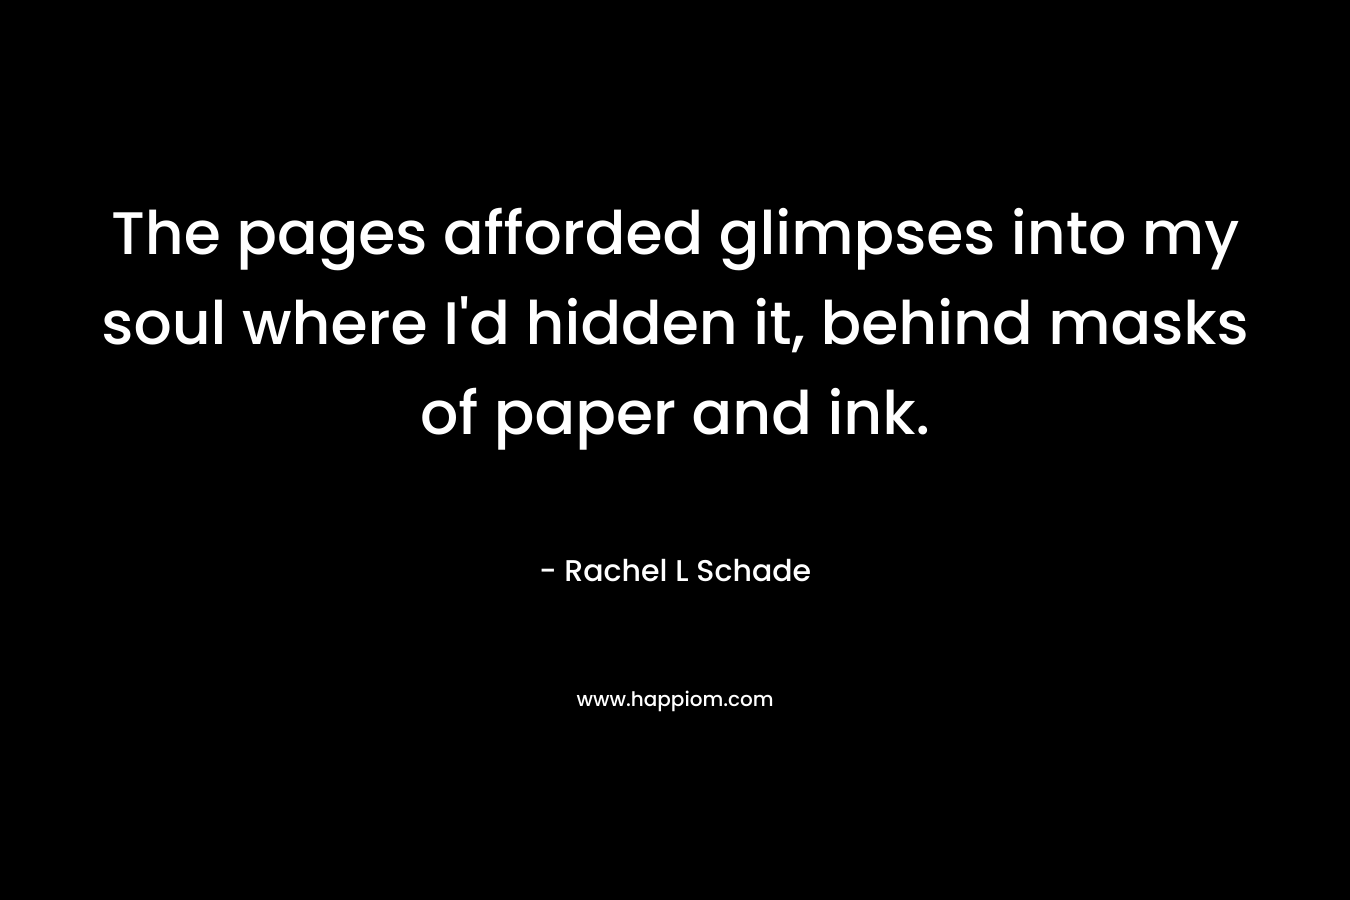 The pages afforded glimpses into my soul where I'd hidden it, behind masks of paper and ink.